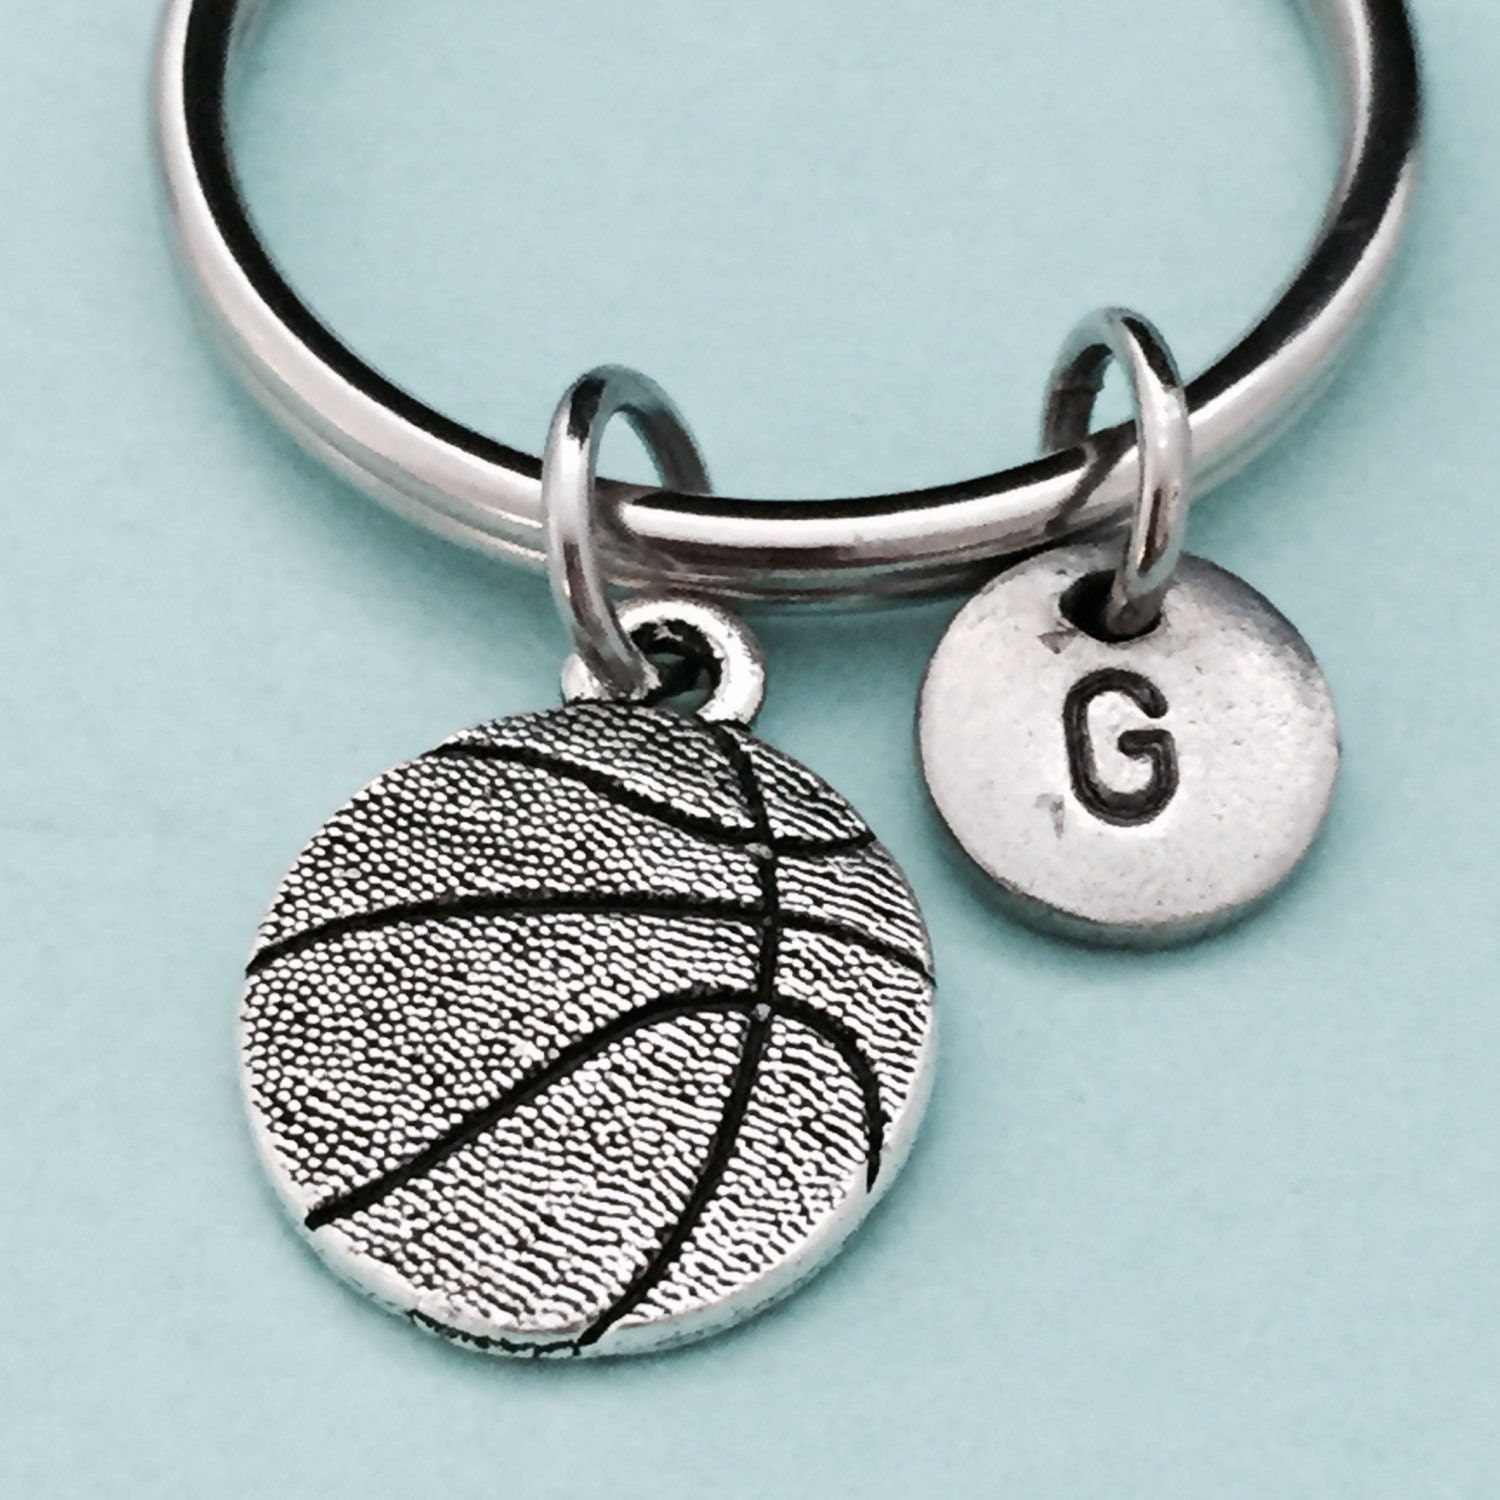 Personalized Basketball-Inspired Charm Keychain